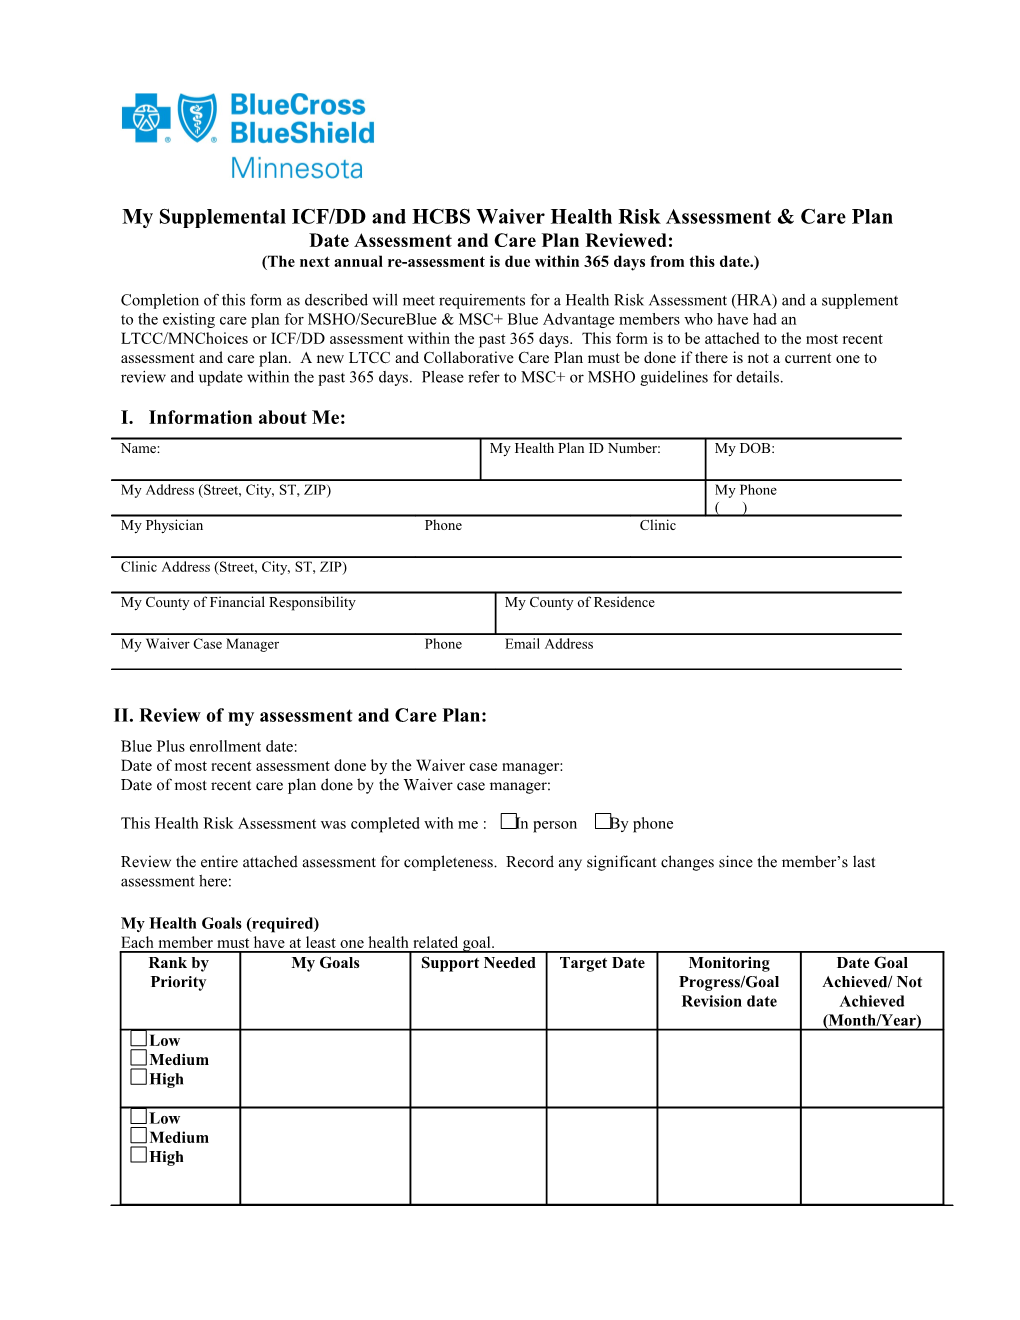 ICF/MR and HCBS Disability Waiver Care Coordination Form